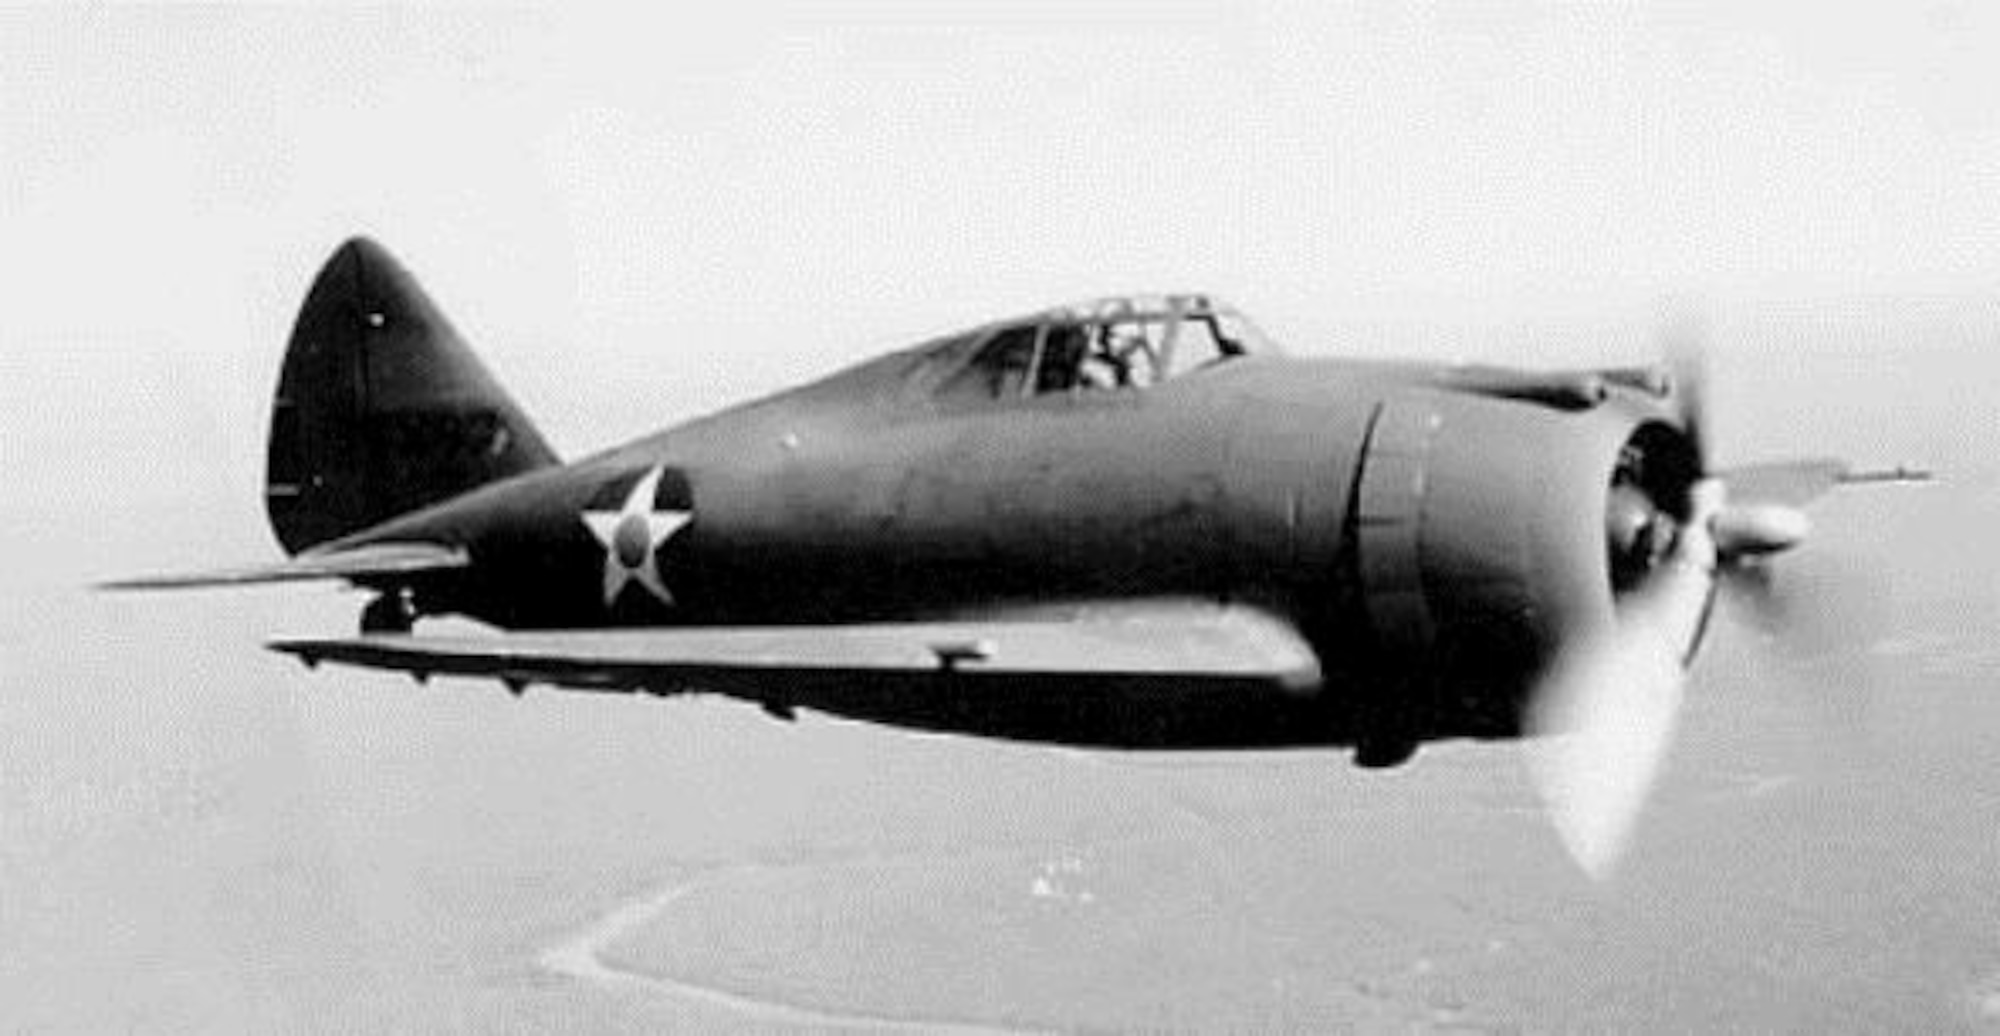 The Republic Aviation Corporation built the P-43 Lancer single-engine pursuit plane for the U.S. Army, which accepted the first examples in 1940.  It was the first fighter type aircraft to be based at Portland Air Base when the 55th Pursuit Group equipped with the type in the spring of 1941, with aircraft coming straight from the Republic production line.  (U.S. Air Force photo)